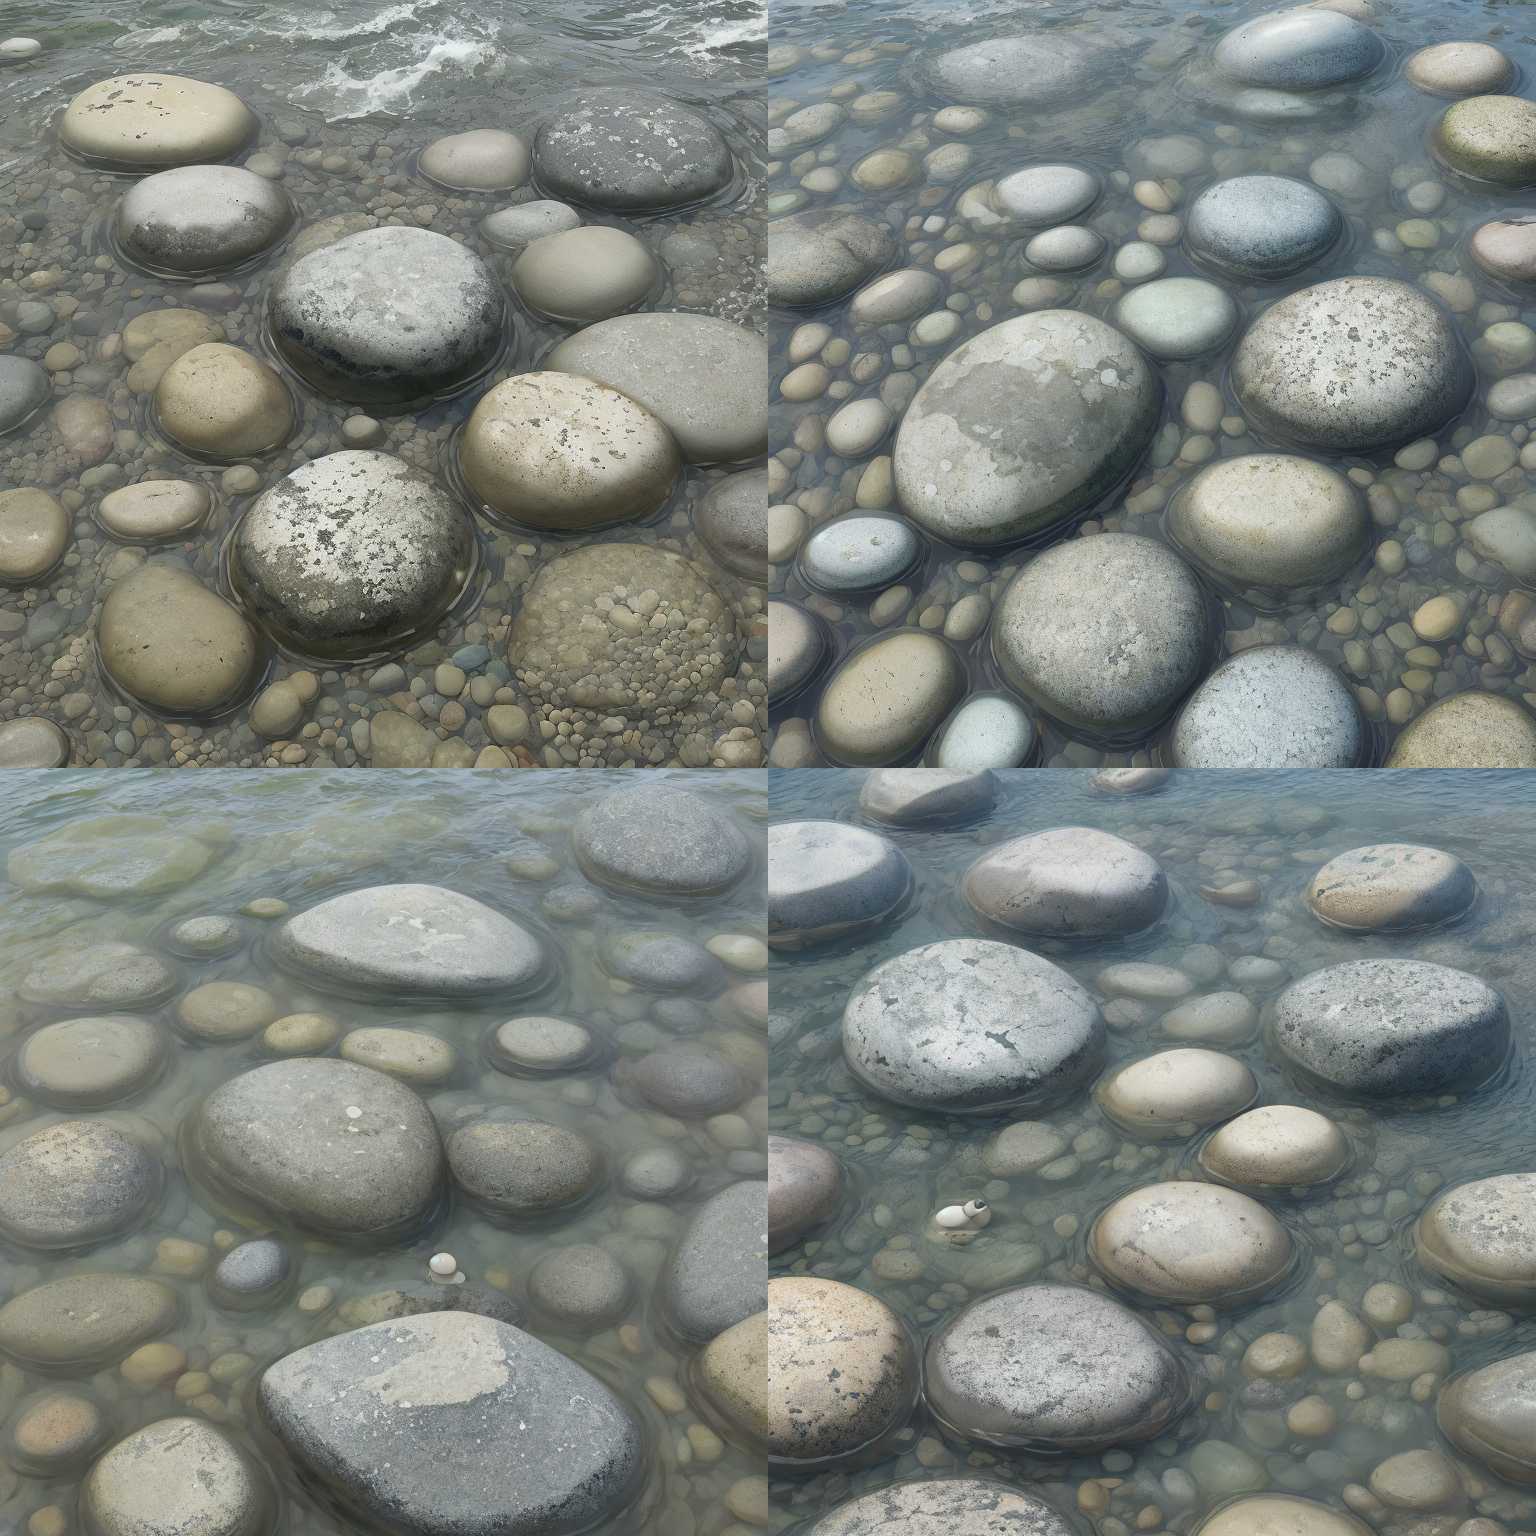 A pebble in the water